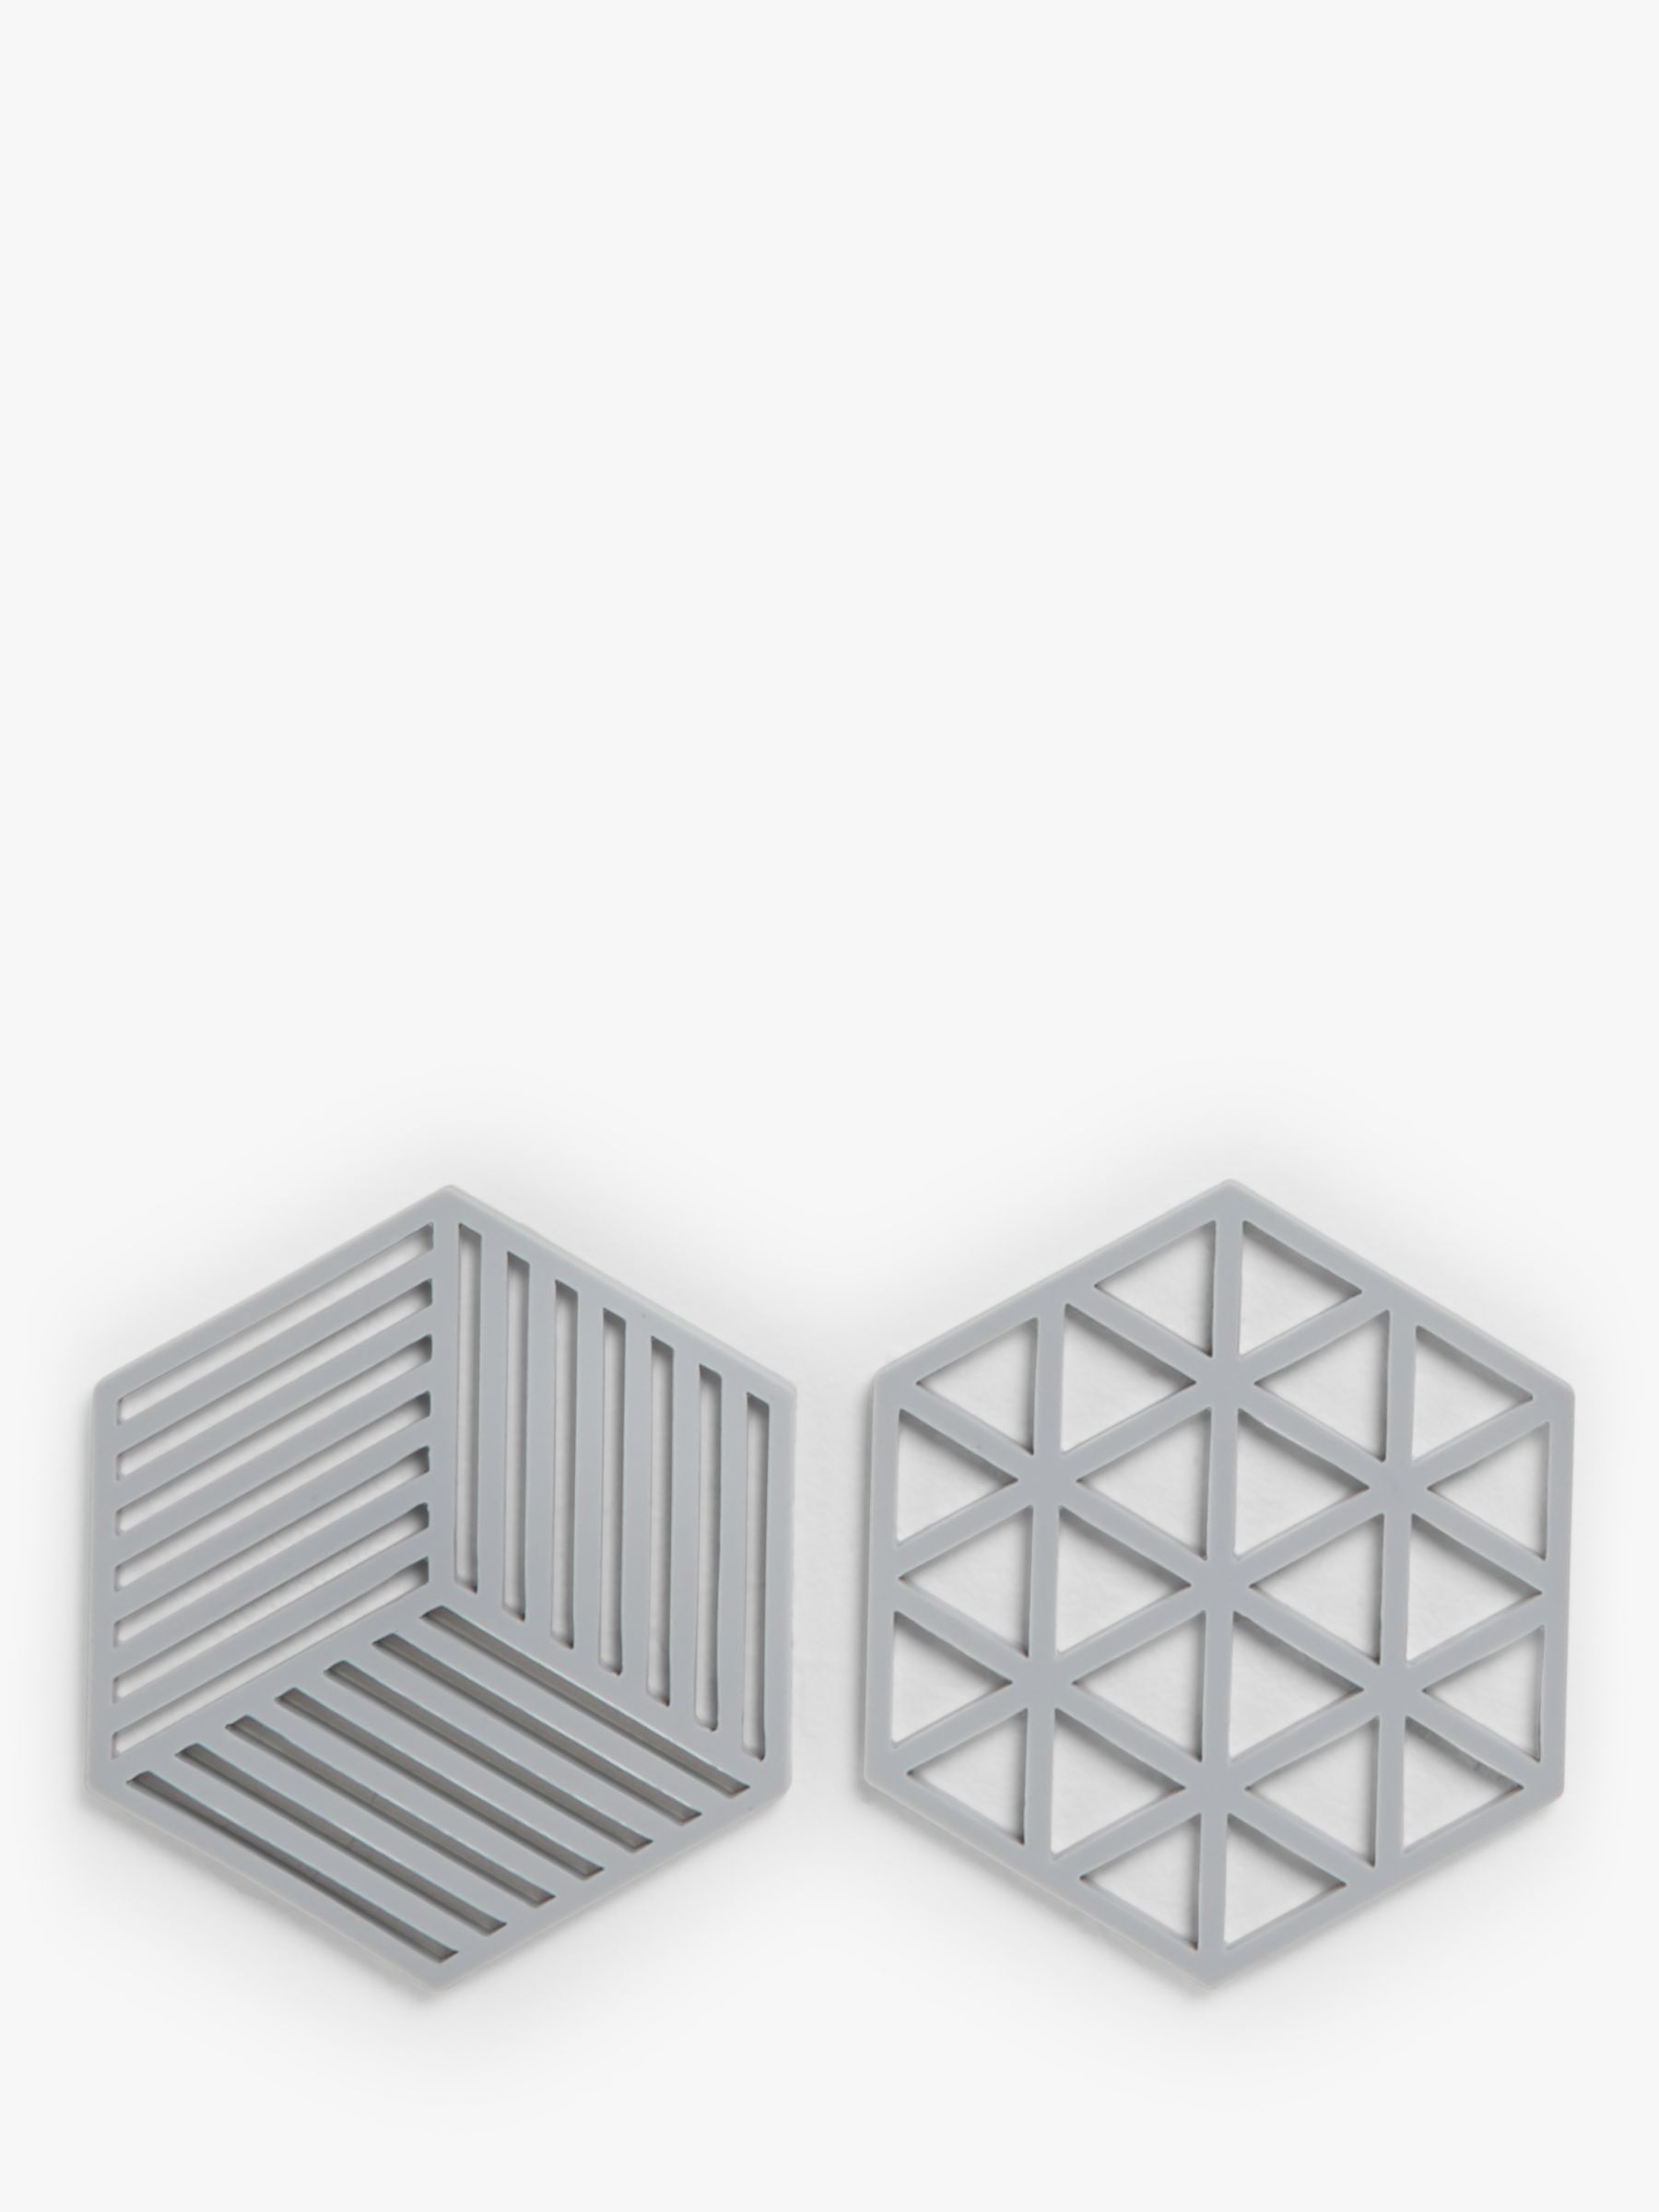 ANYDAY John Lewis & Partners Hexagonal Silicone Trivets, Set of 2, Grey